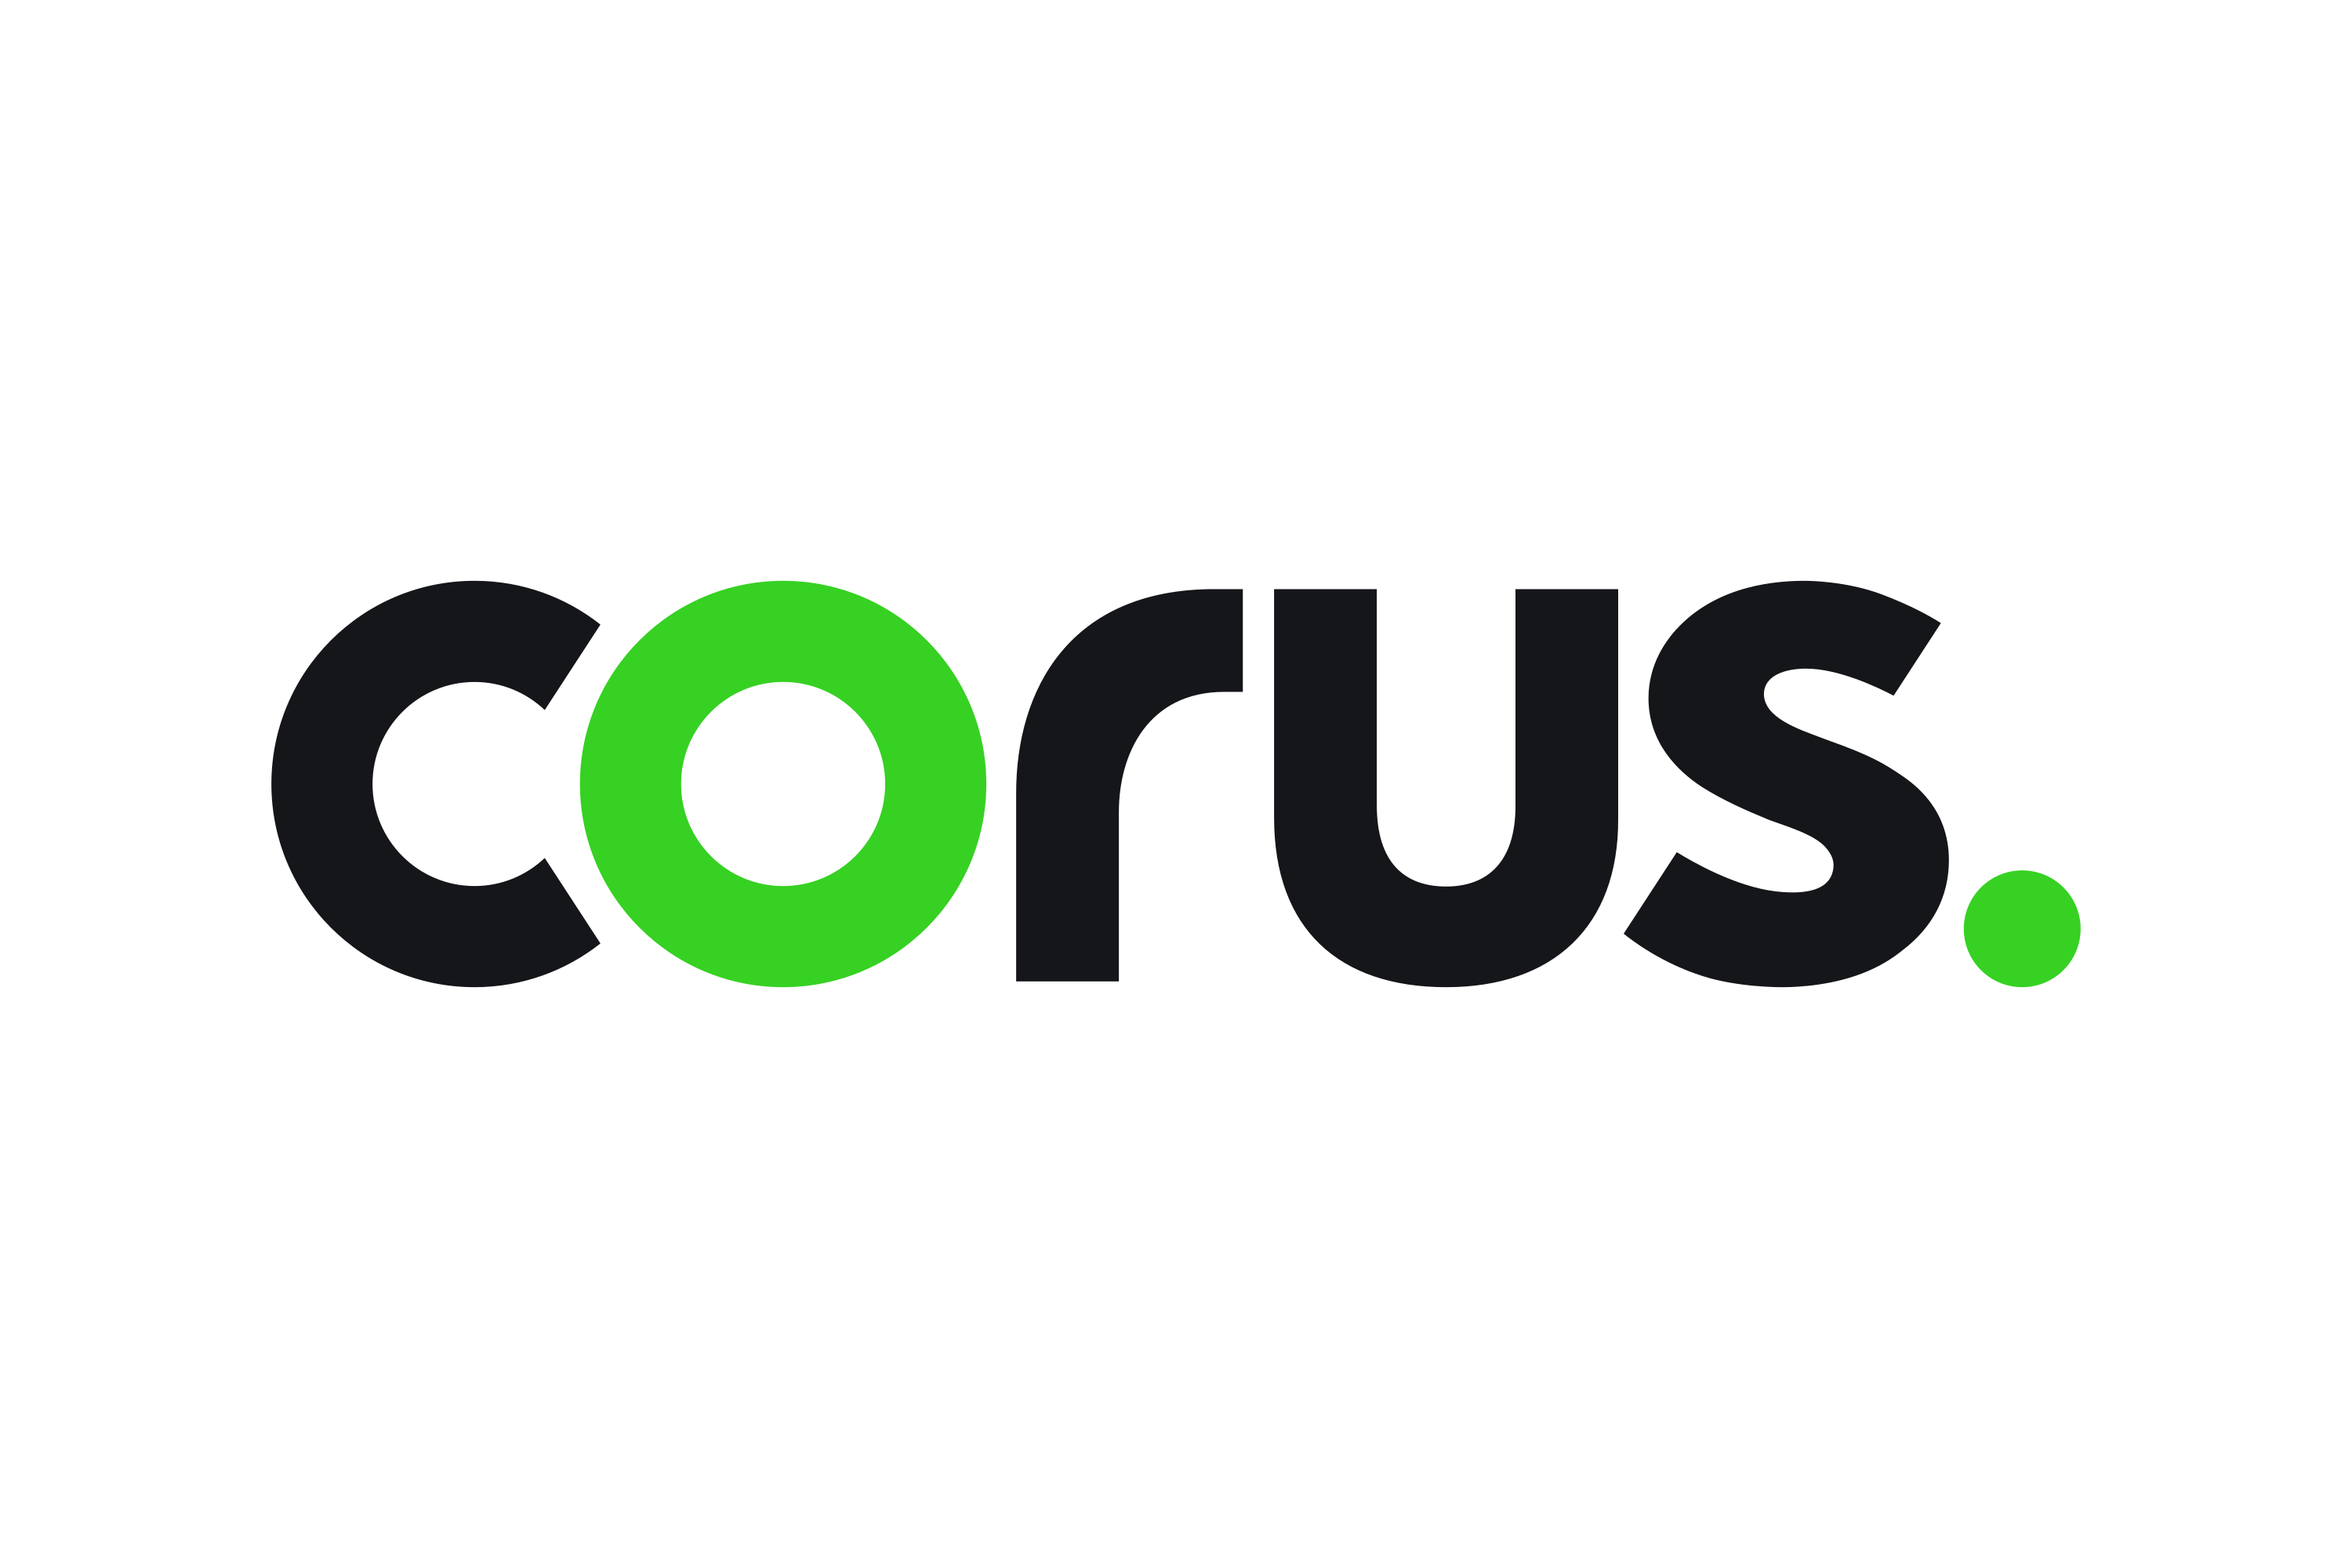 Download Corus Entertainment Logo in SVG Vector or PNG File Format